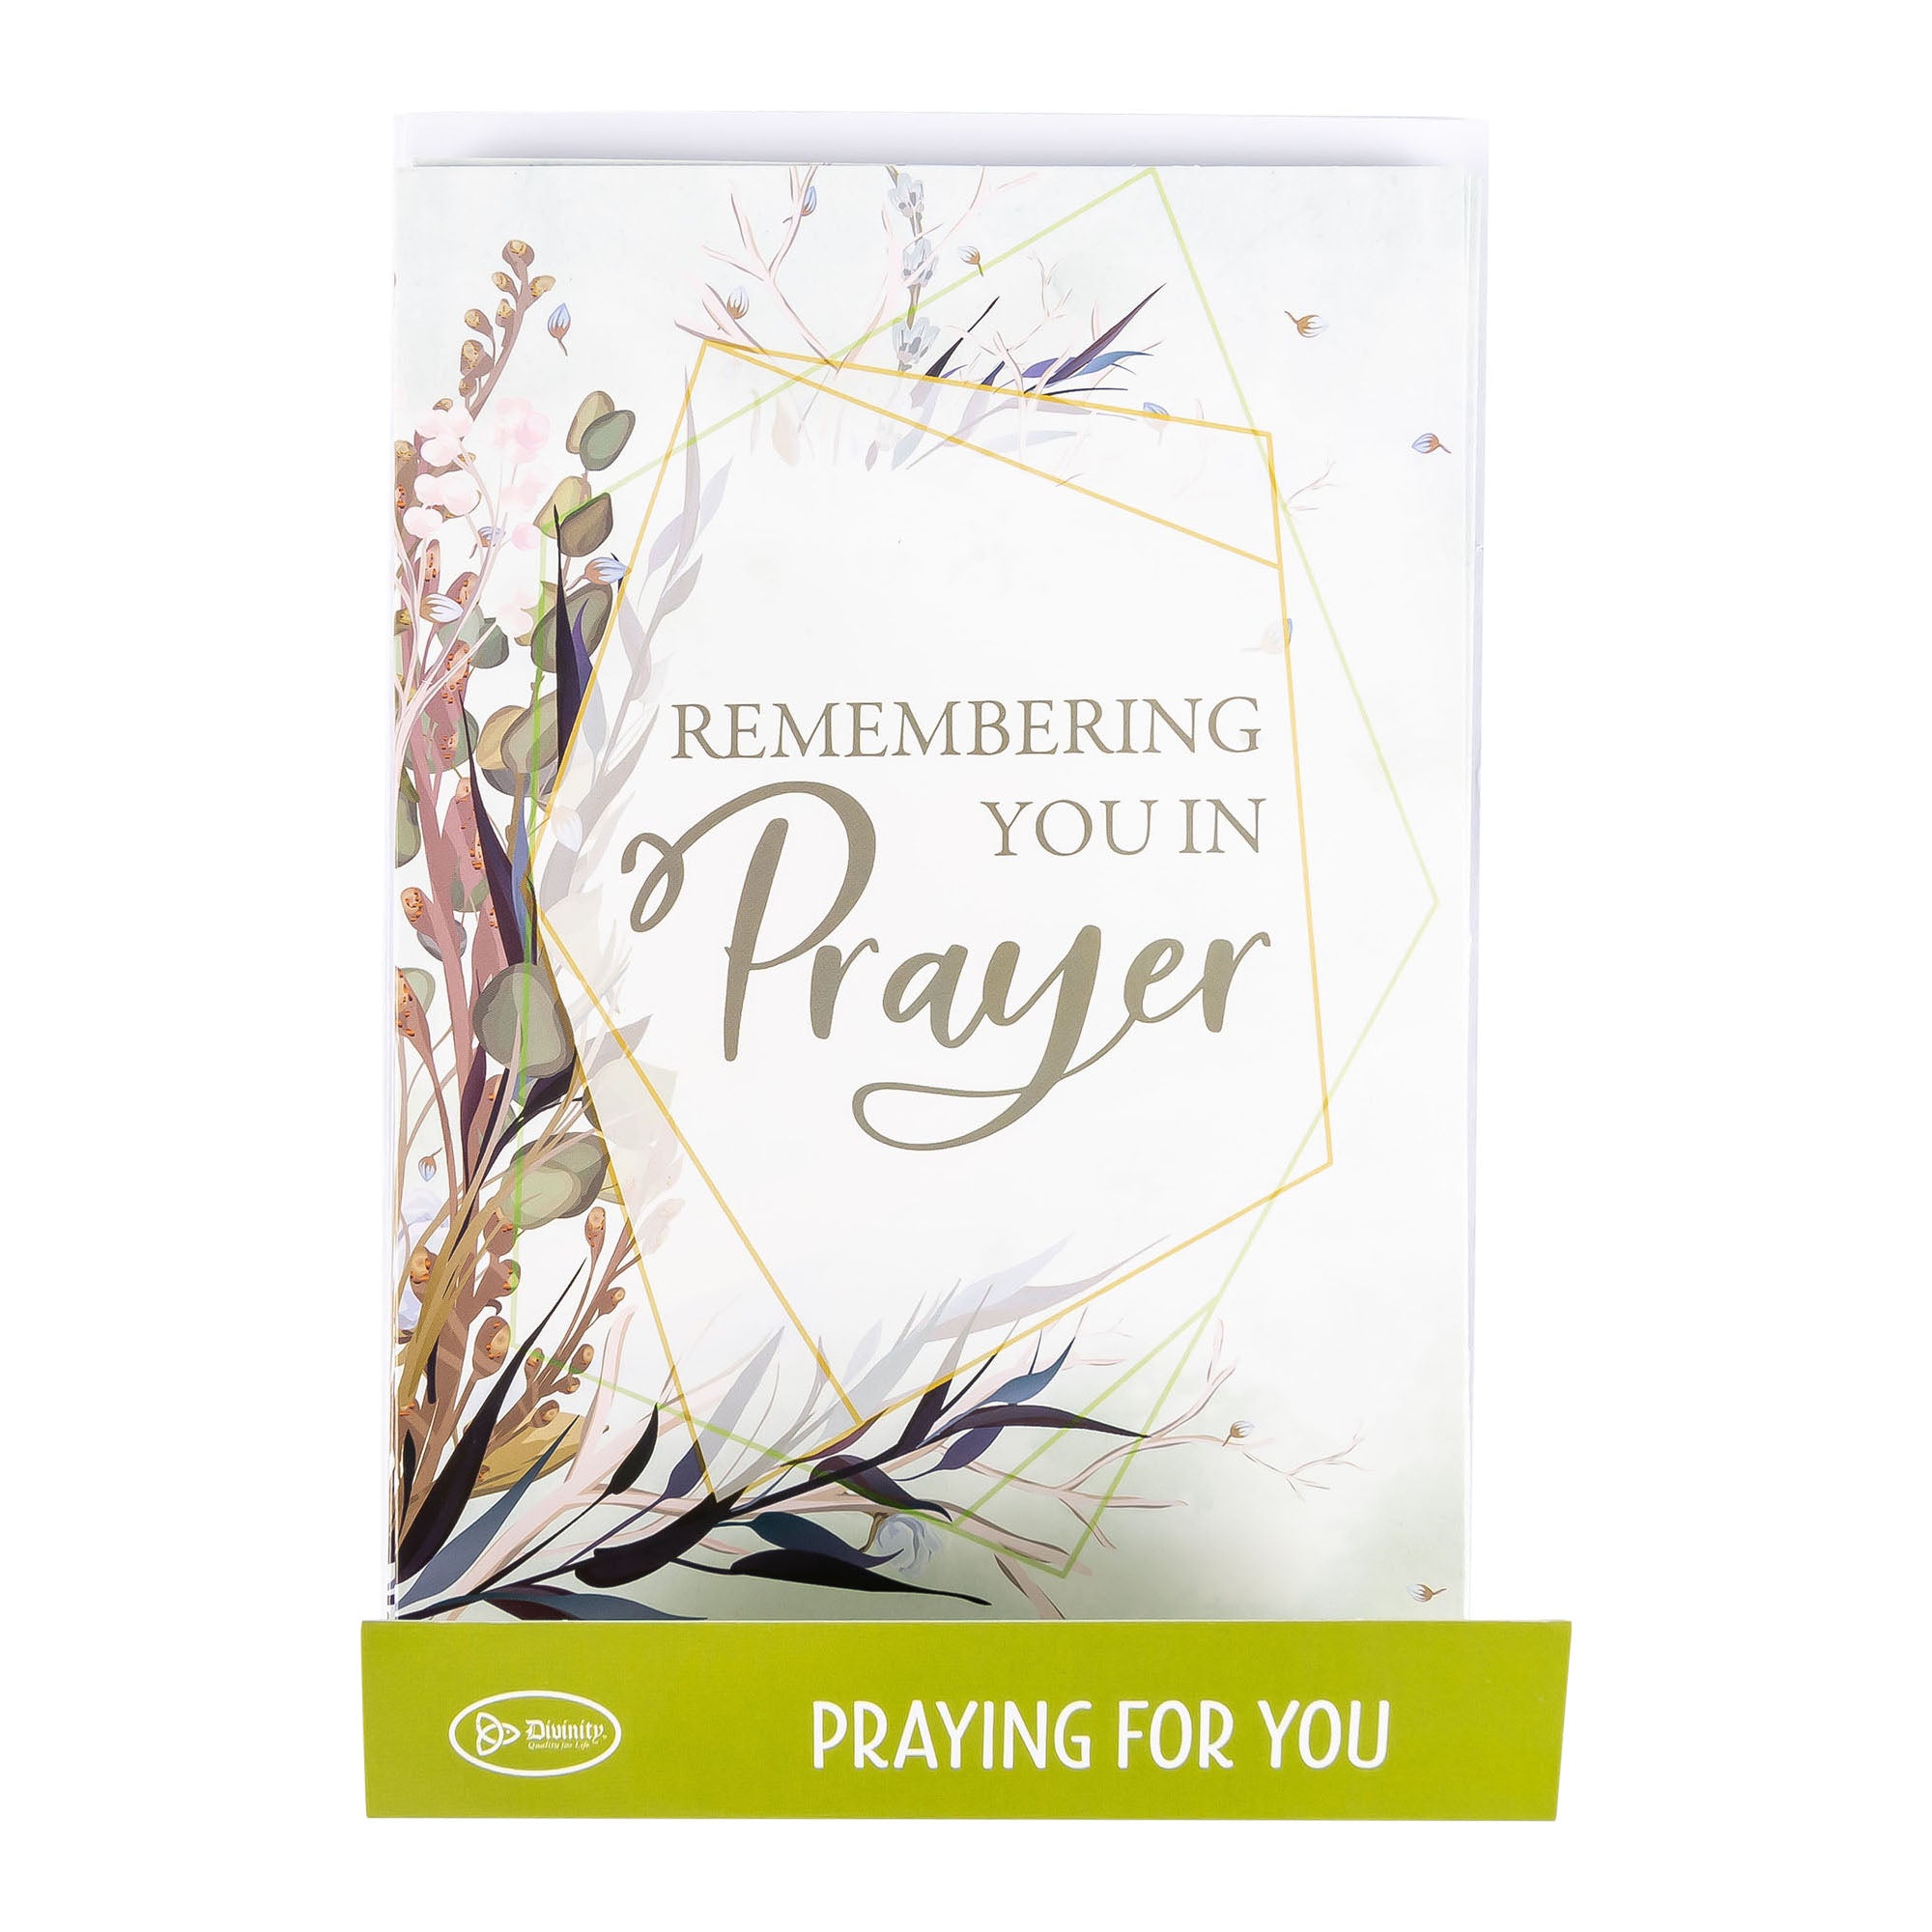 Single Cards - Praying for You - Remembering Psalm 119:76 (6 pk)